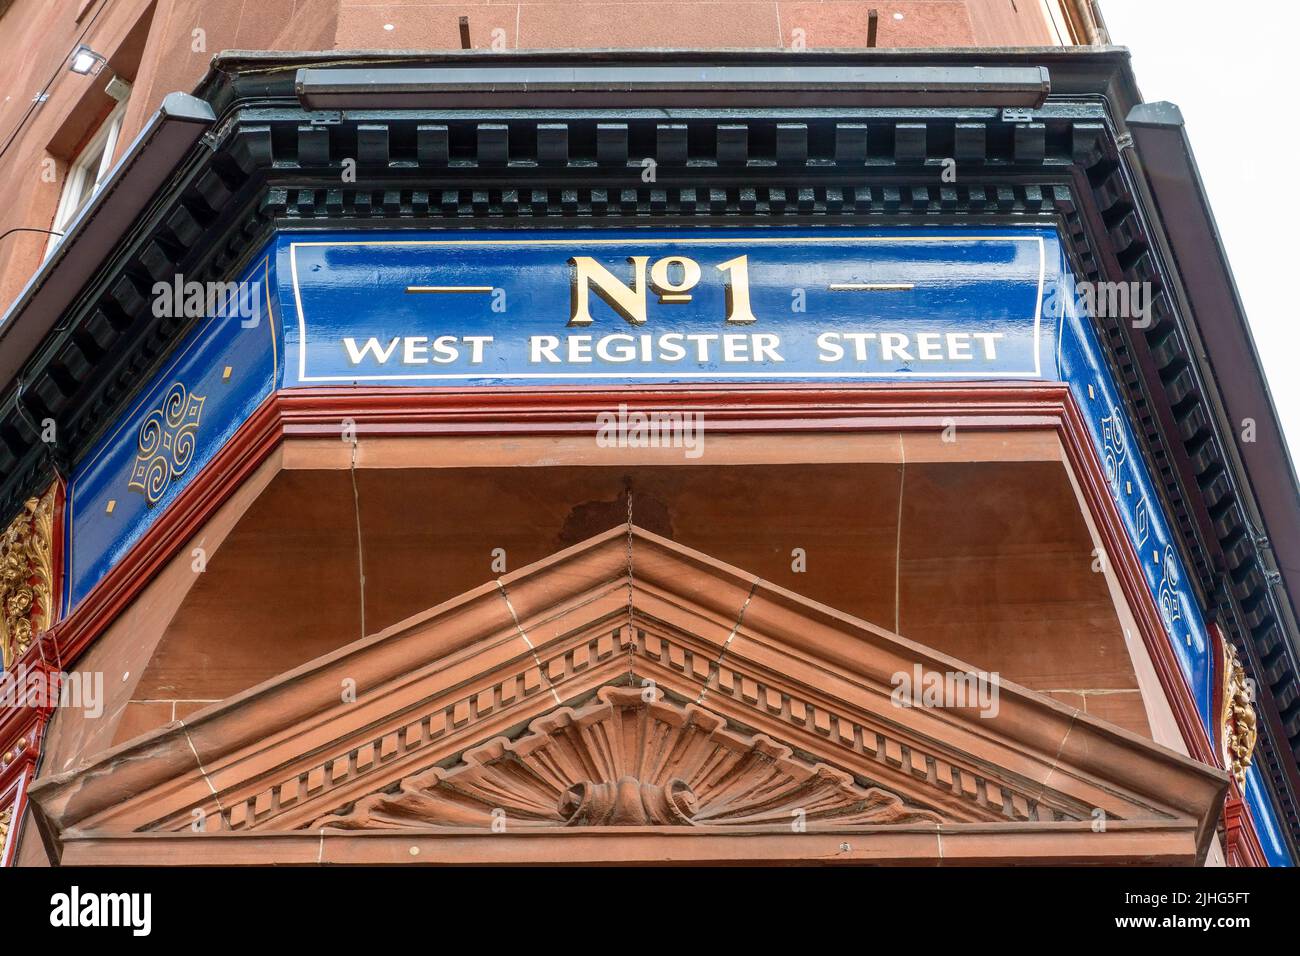 No.1 West Register Street sign painted on the side of a building in the city centre of Edinburgh, Scotland Stock Photo